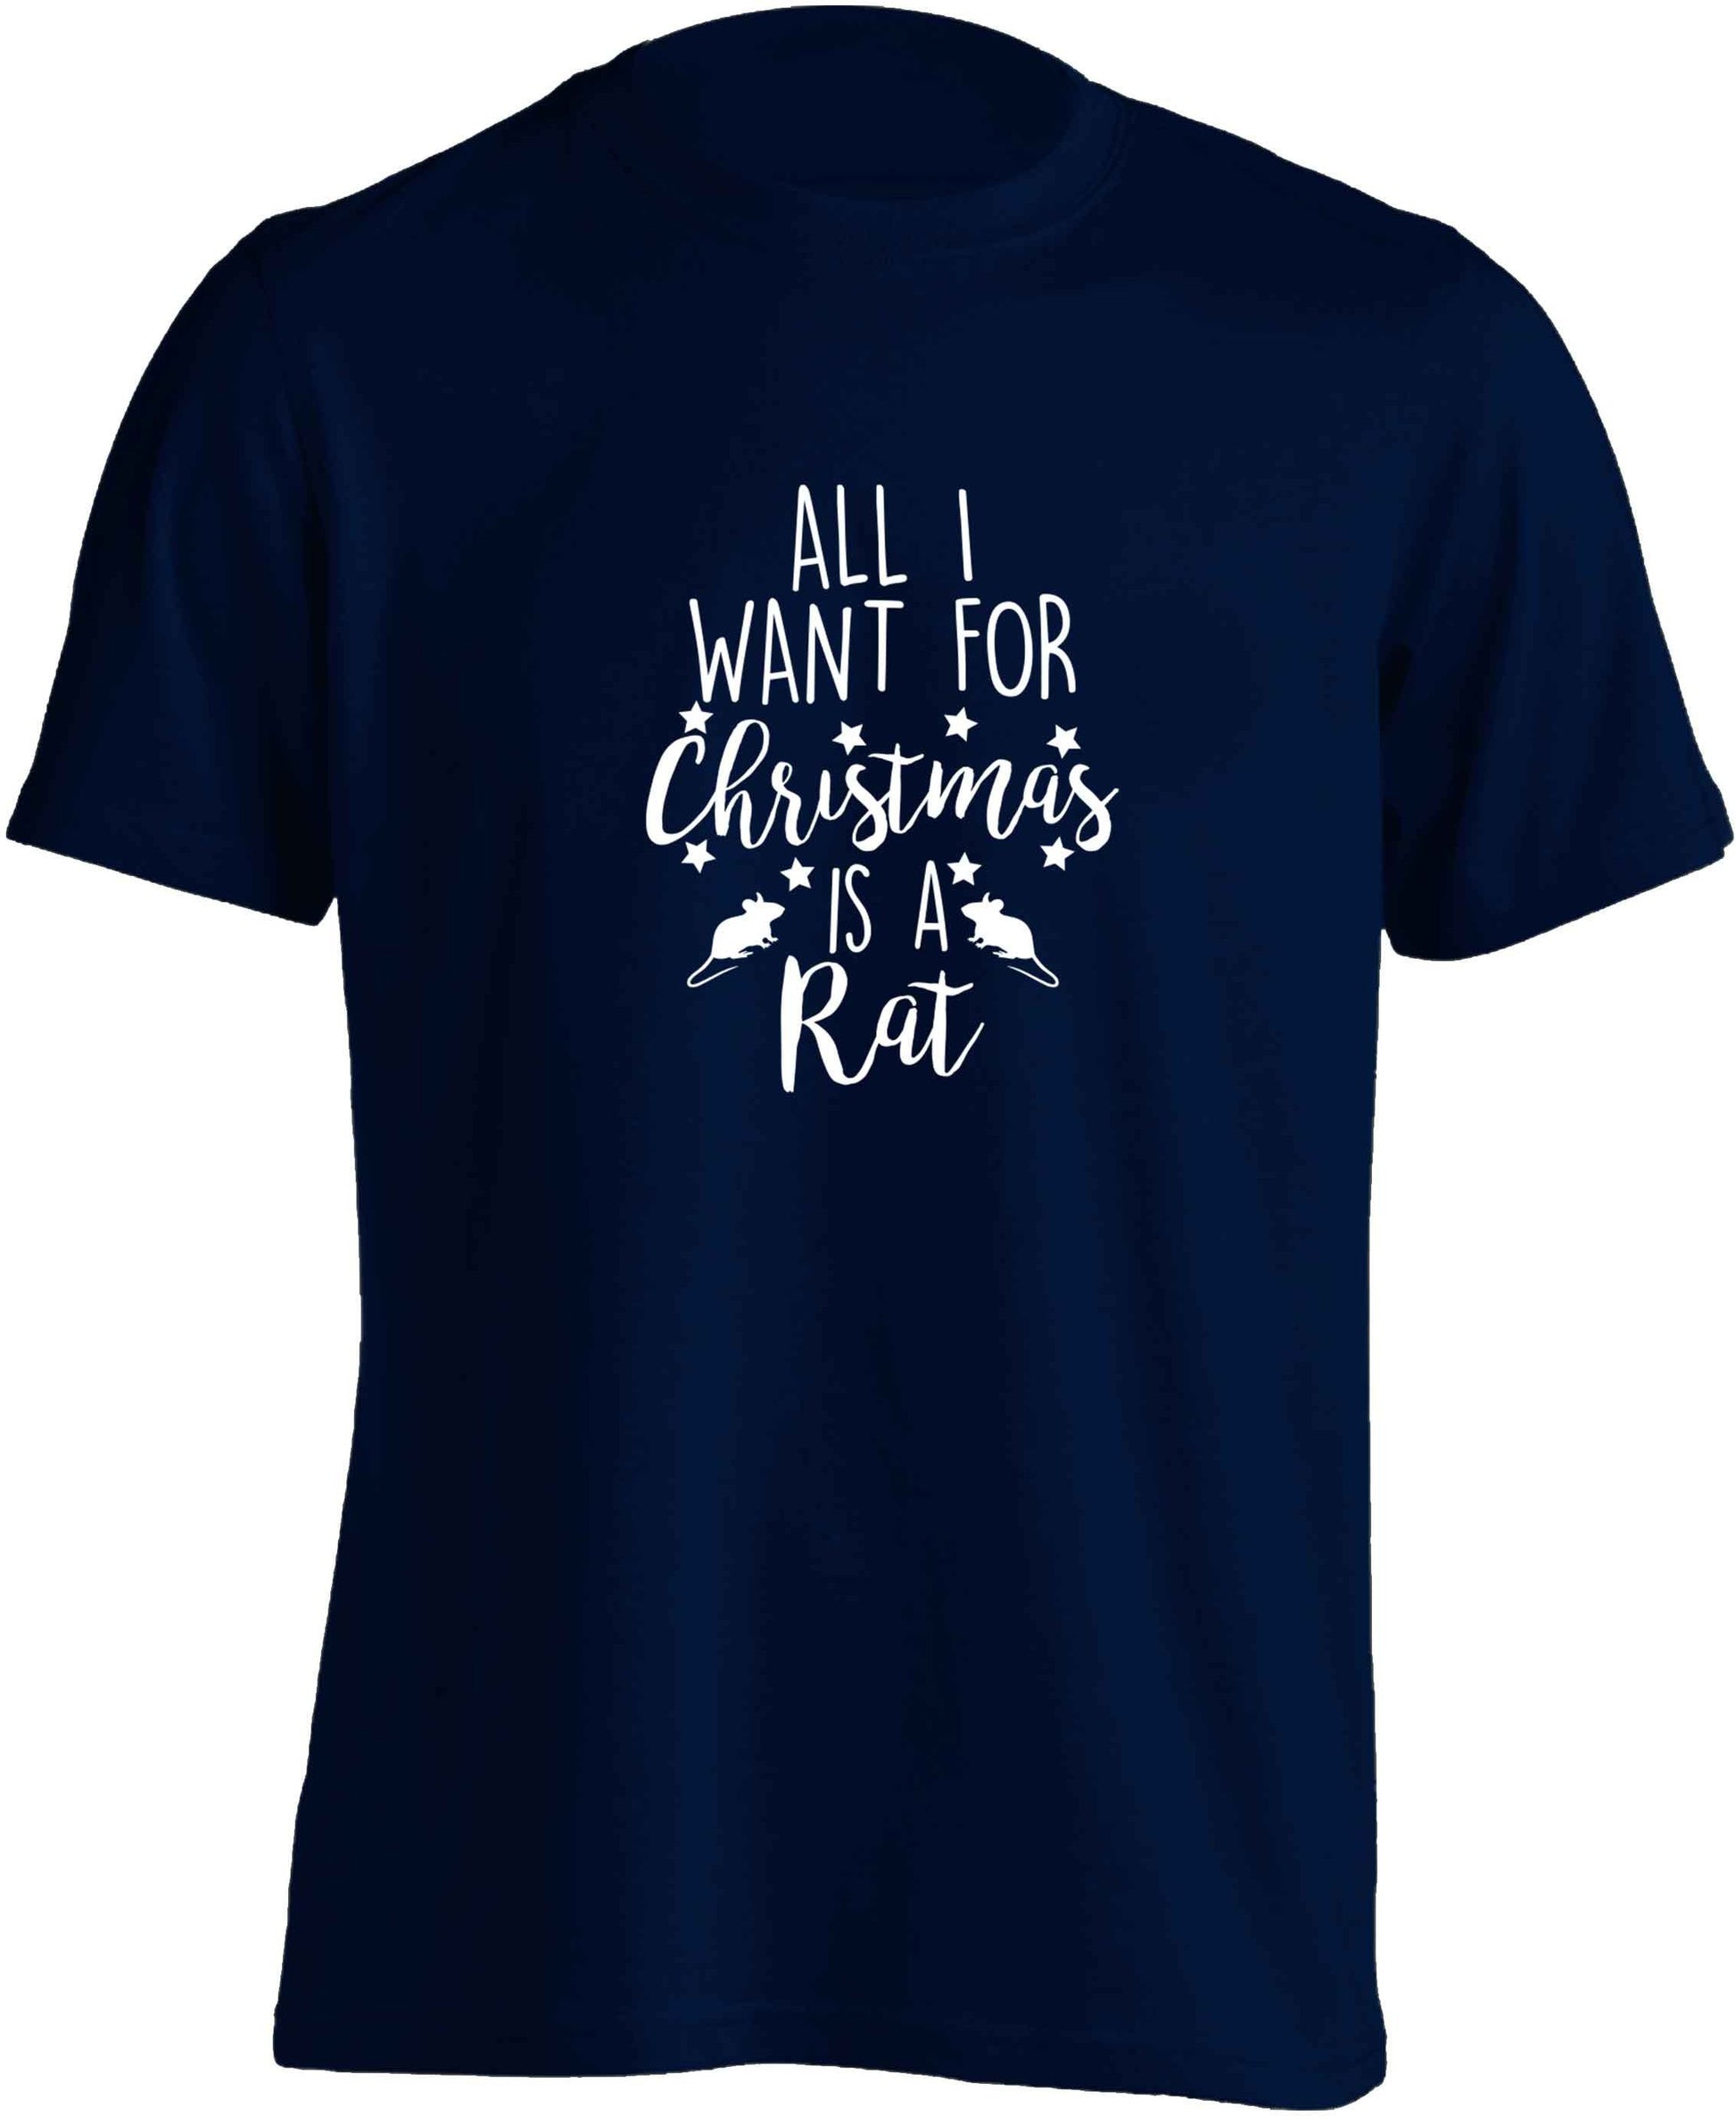 All I want for Christmas is a rat adults unisex navy Tshirt 2XL